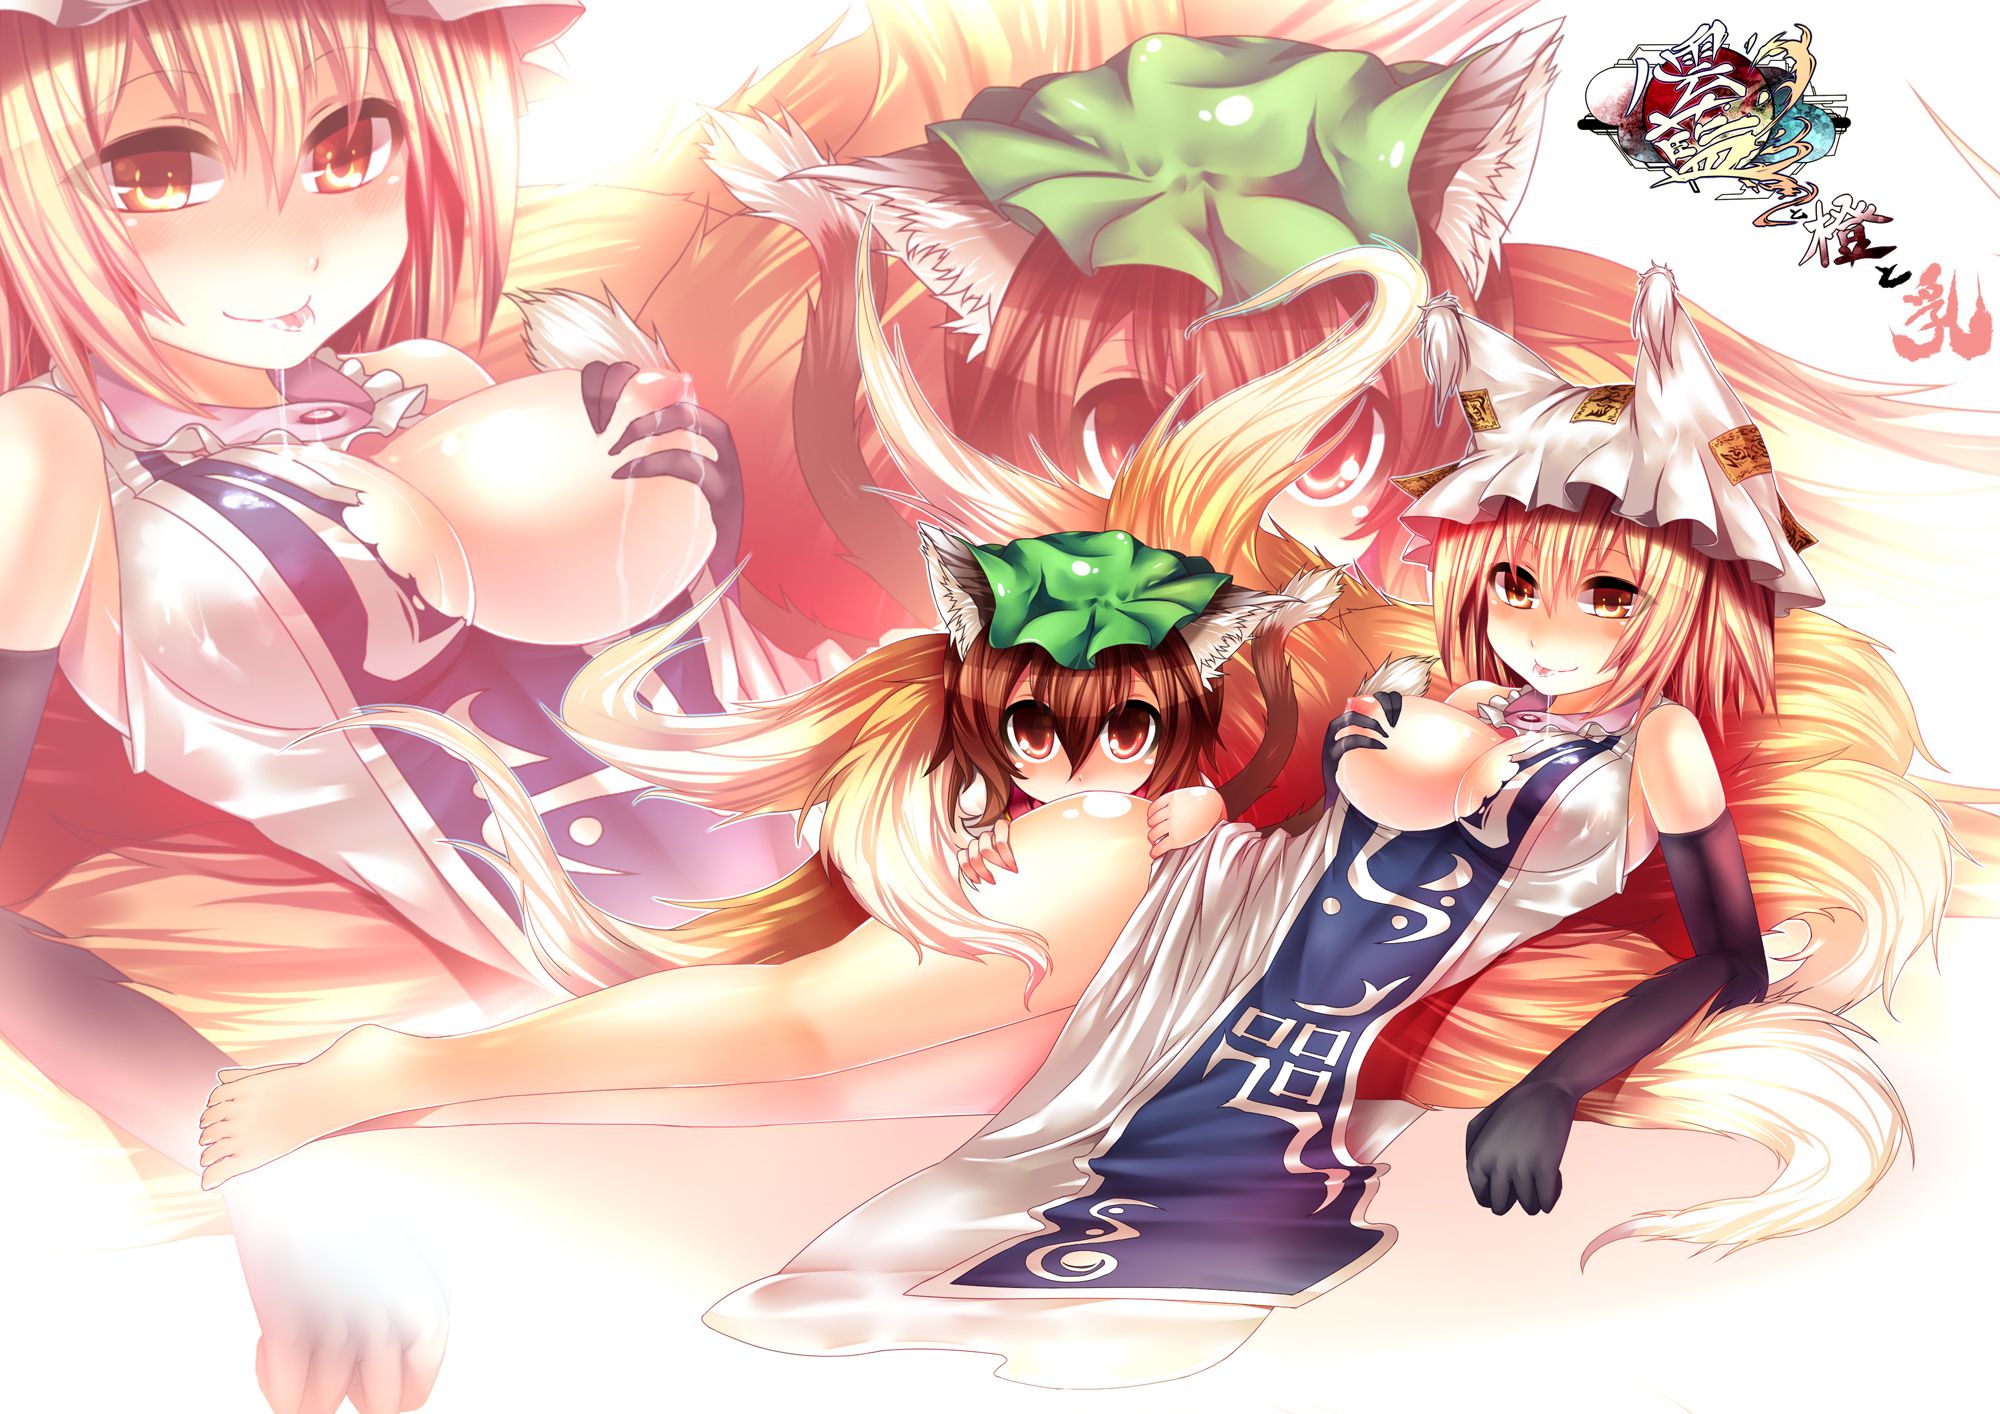 [Touhou Project: Yakumo ran erotic pictures affixed to a random thread 13